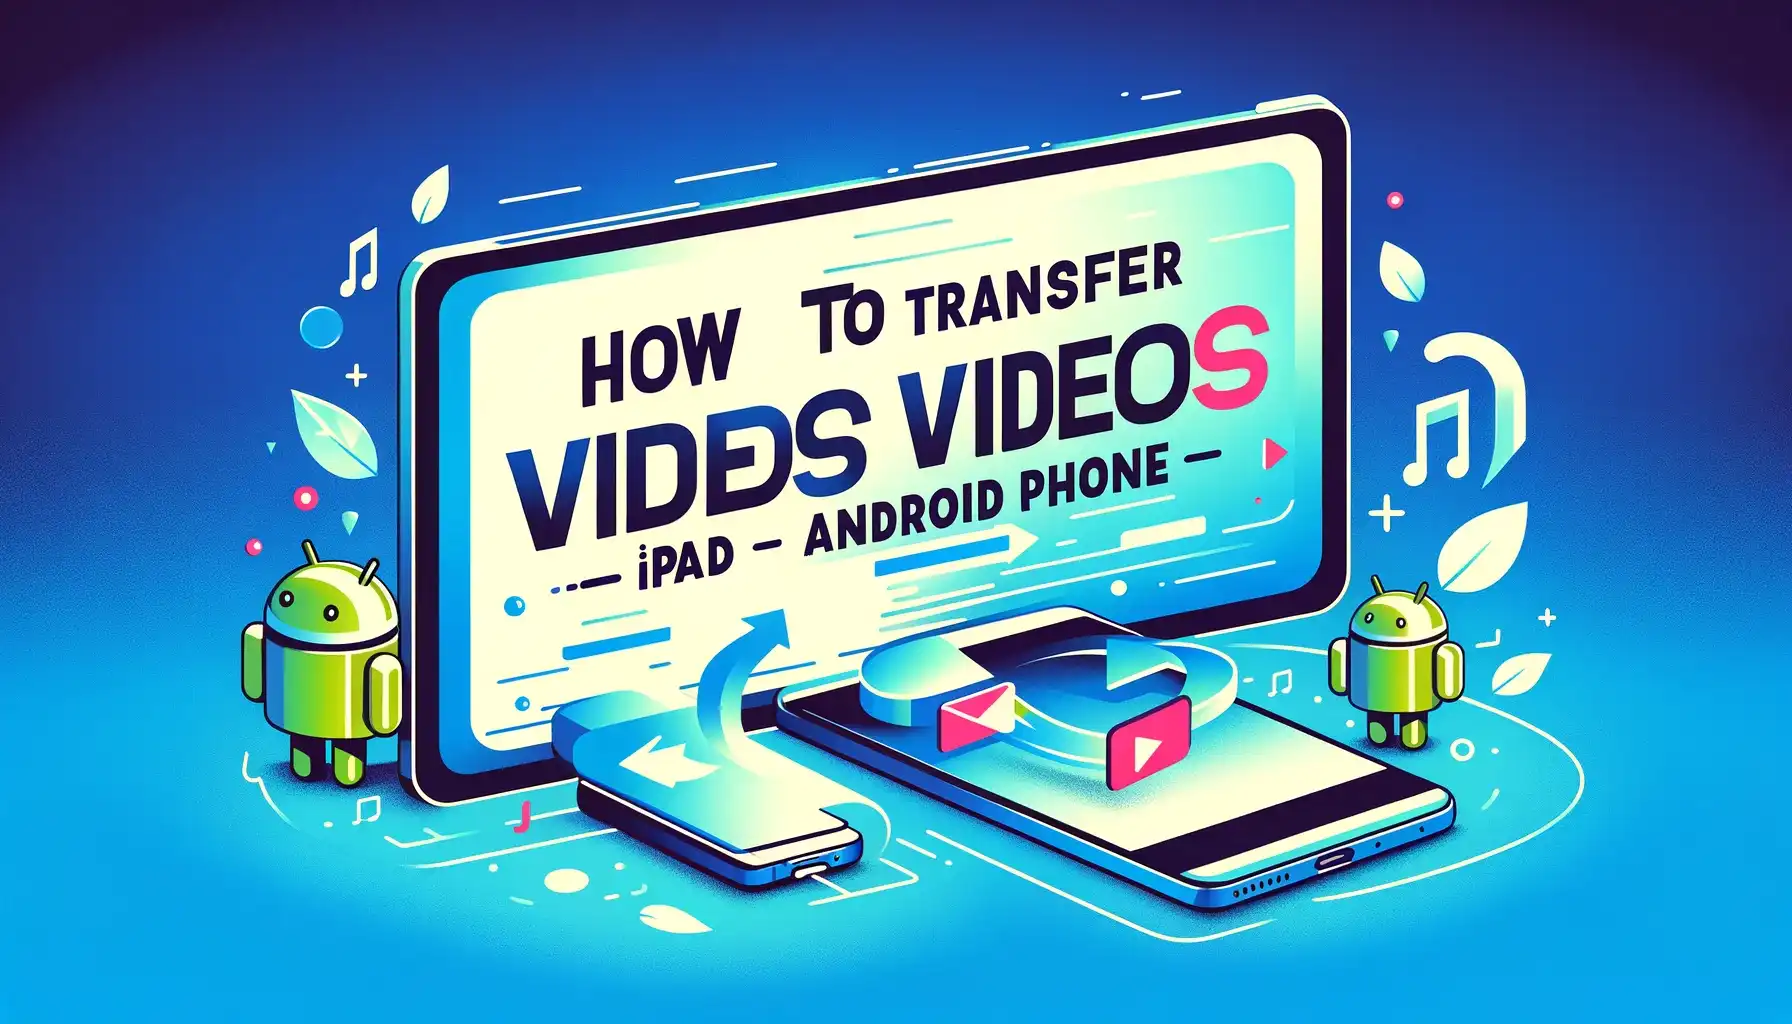 How to Transfer Videos from iPad to Android Phone